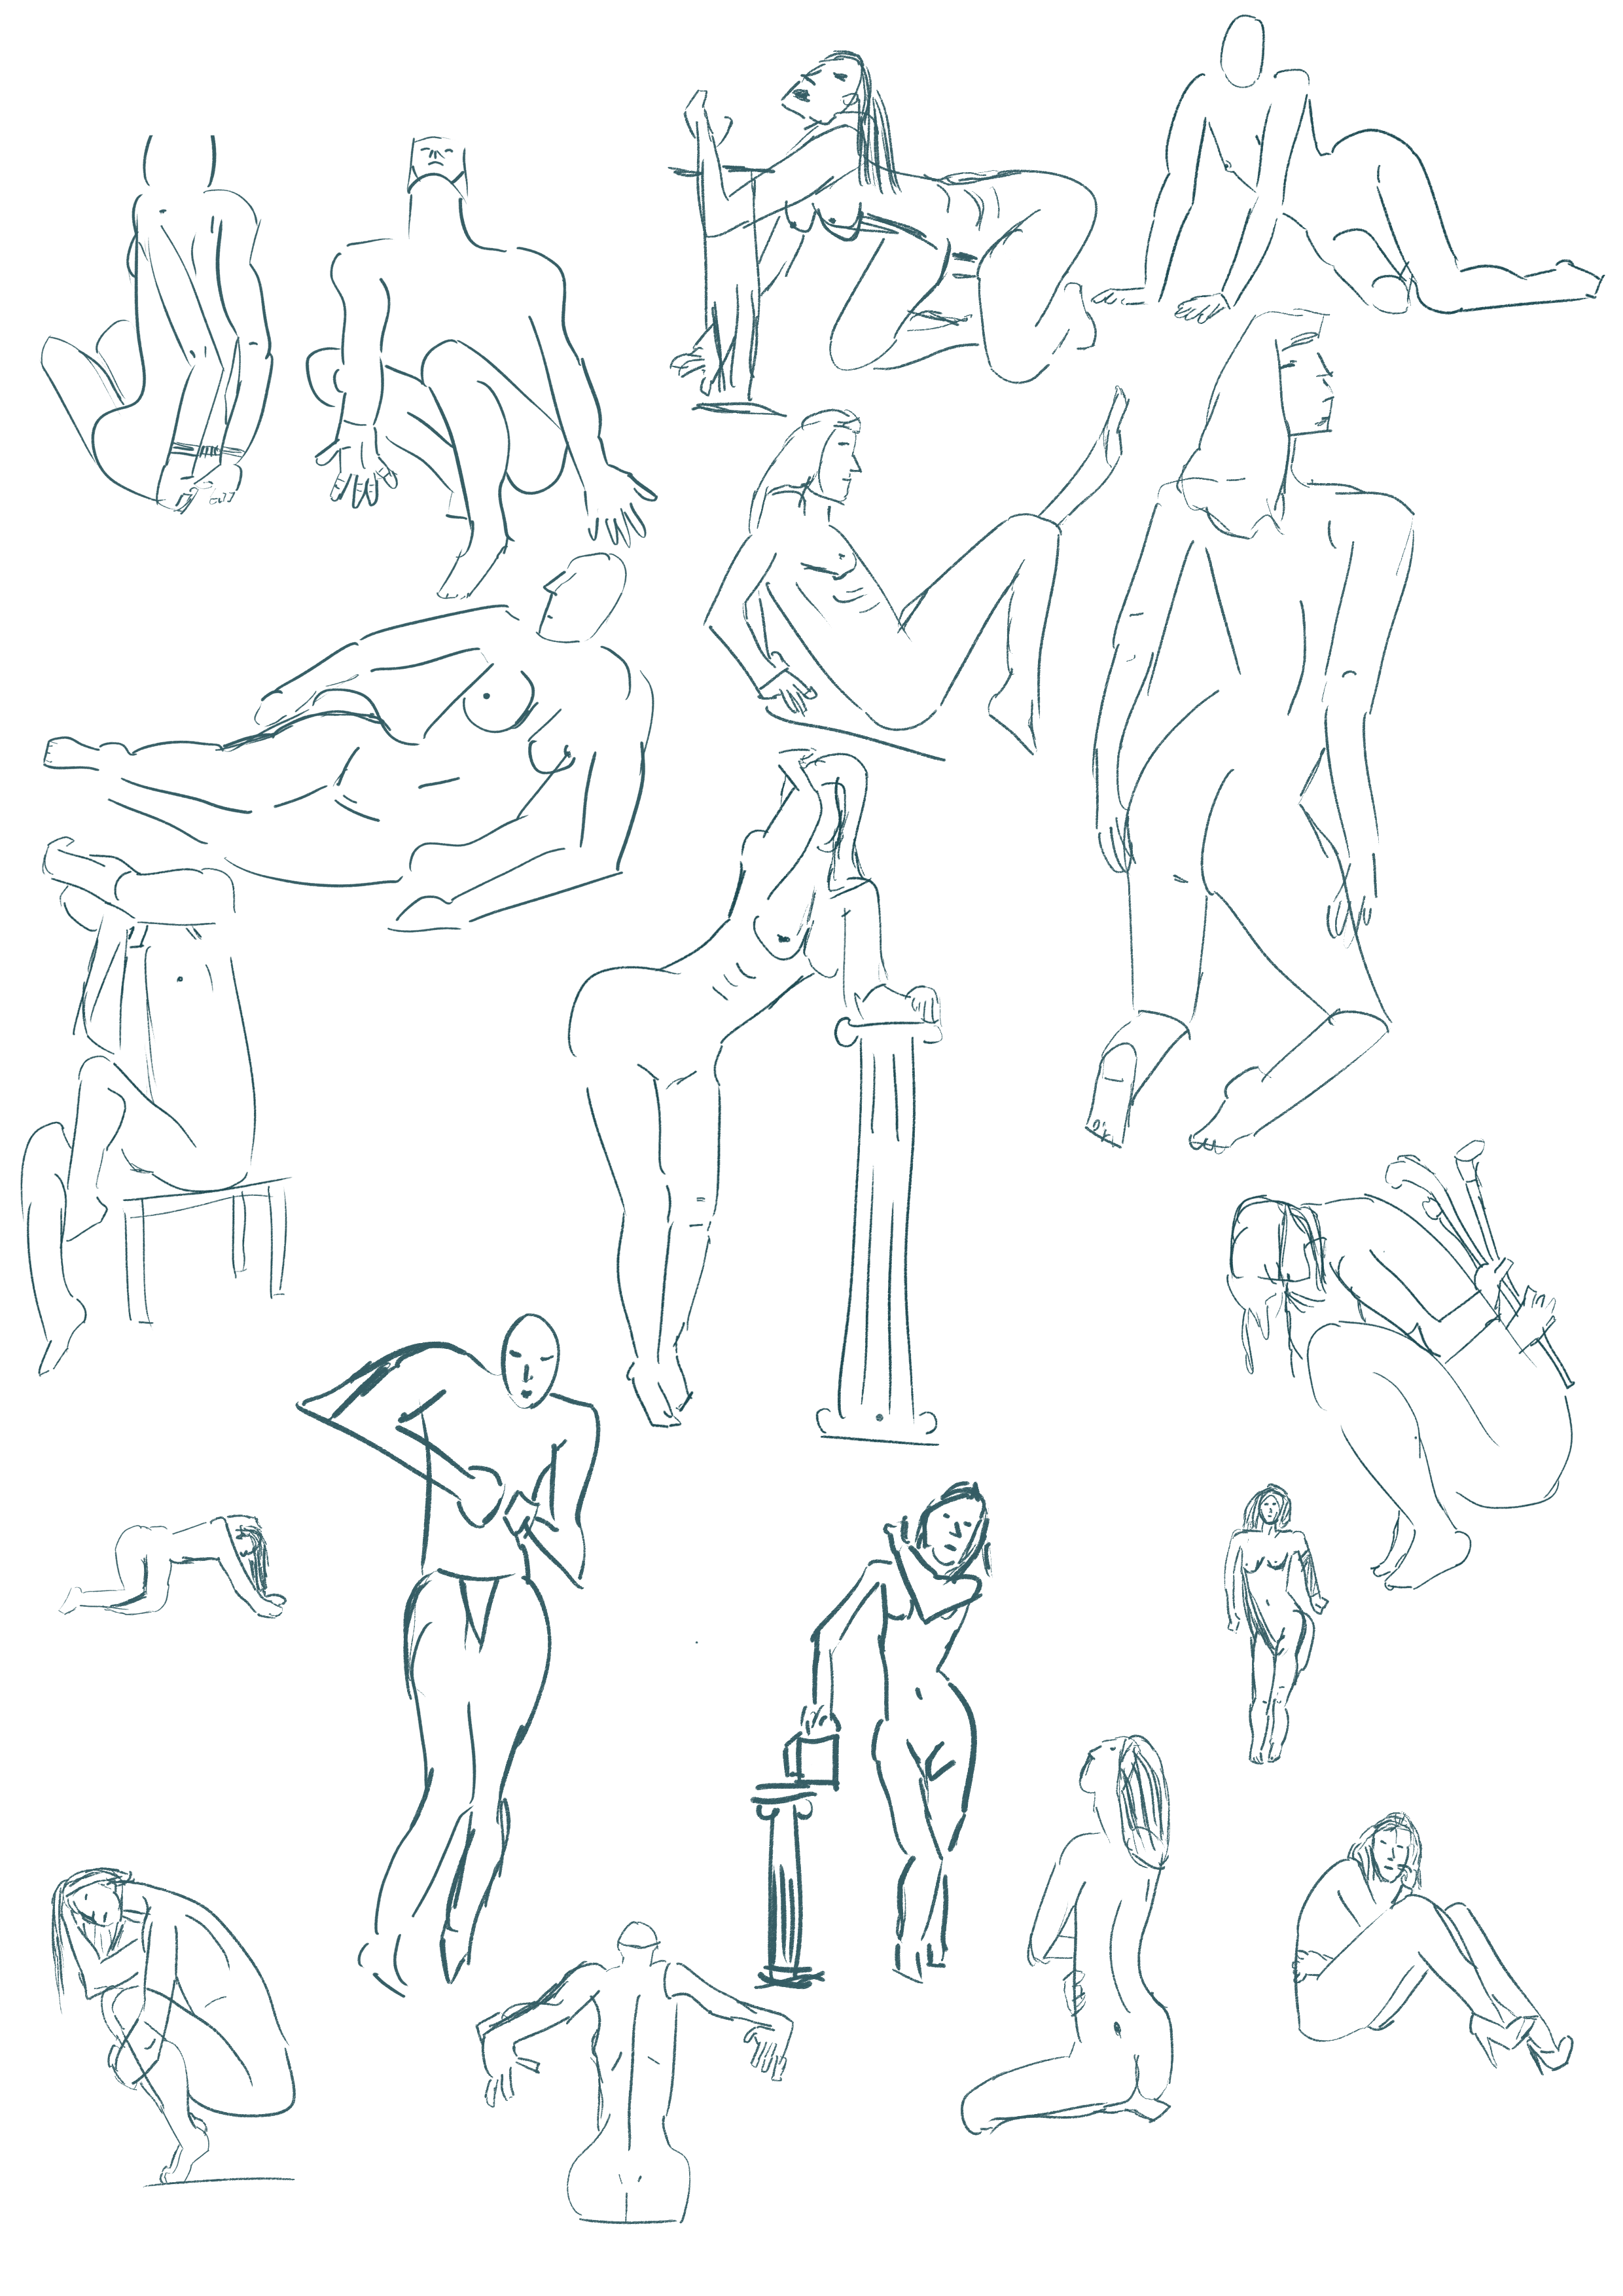 A picture of my gesture drawing session.